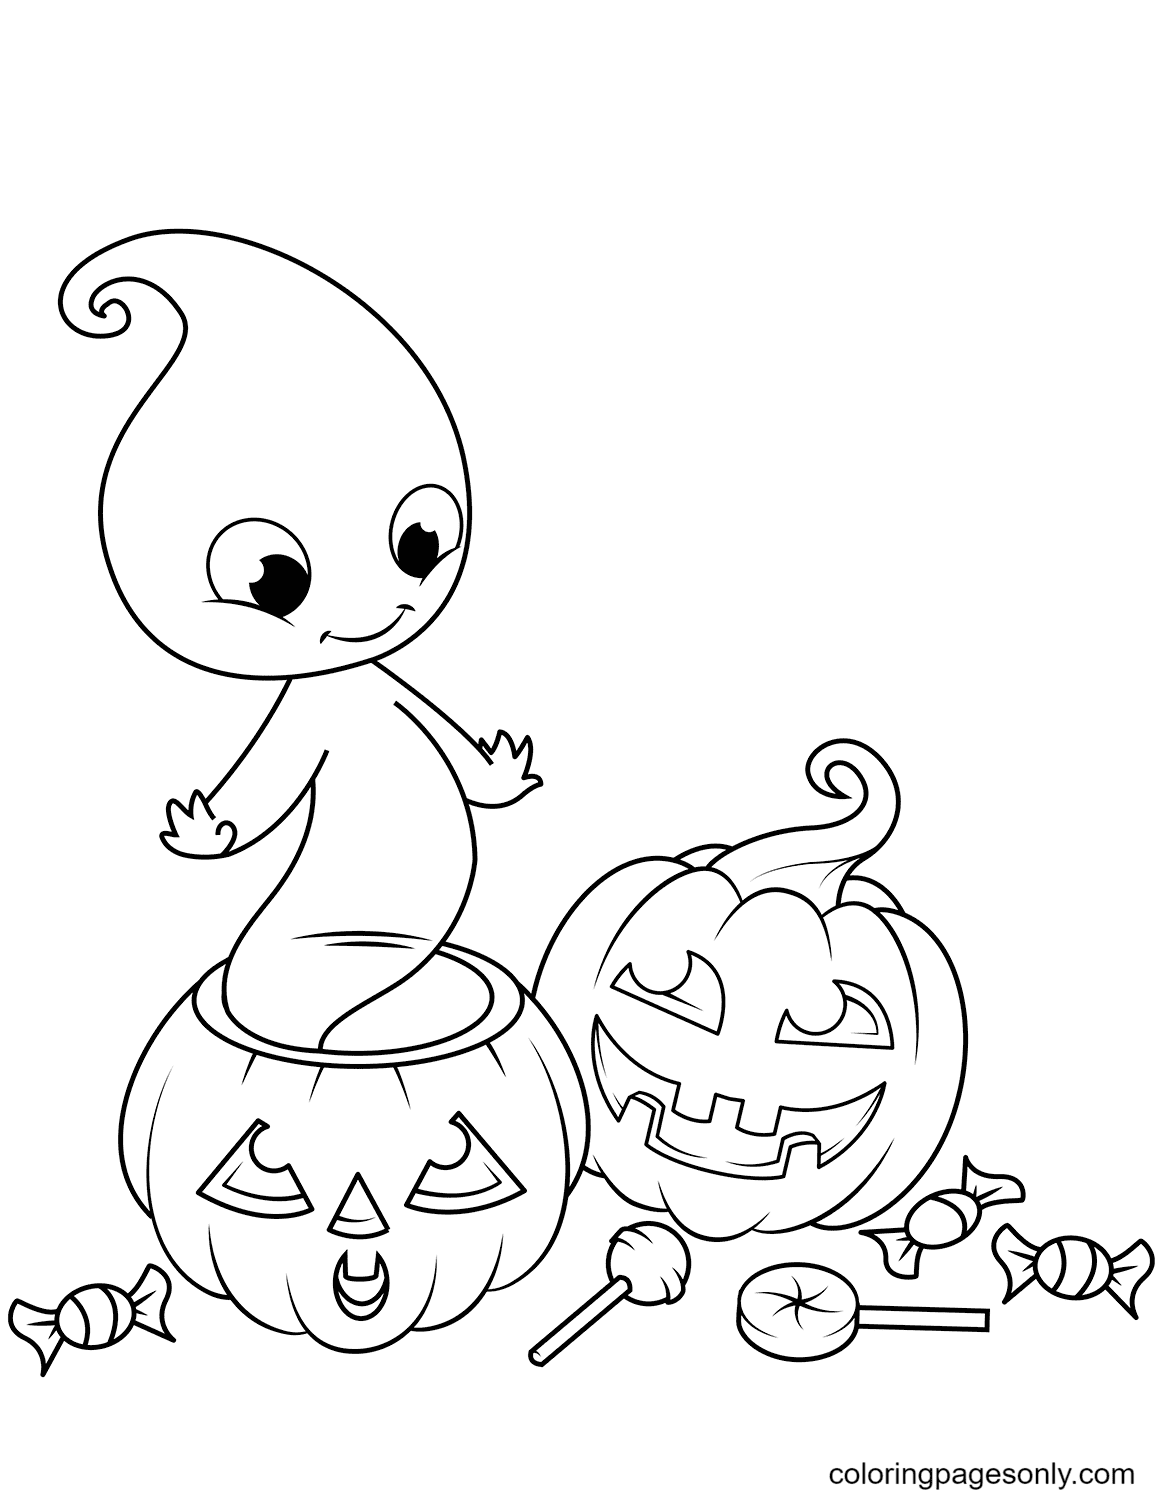 Cute Ghost from Jack O’Lantern Coloring Pages